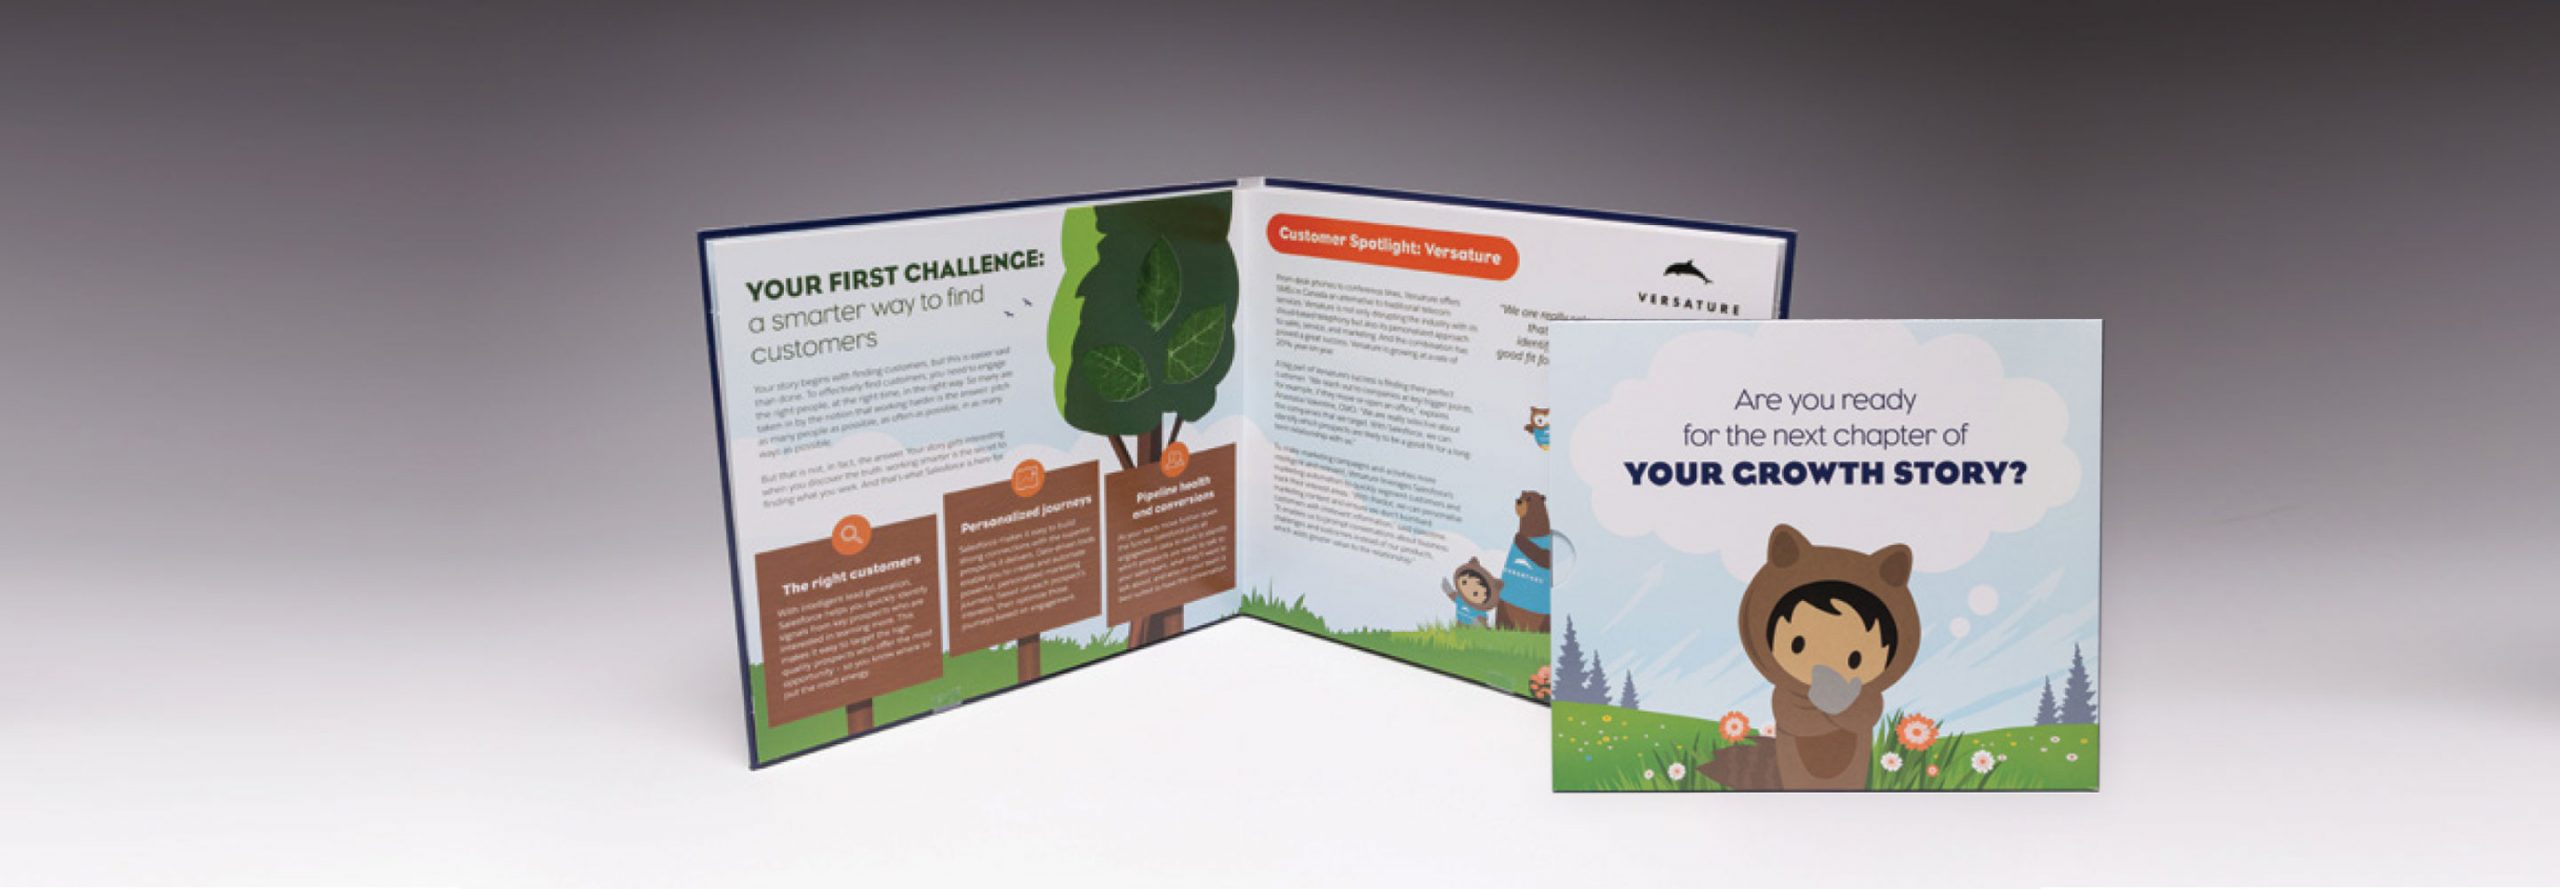 A book sleeve with the text “Are you ready for the next chapter of your growth story?” is propped against Salesforce’s book.